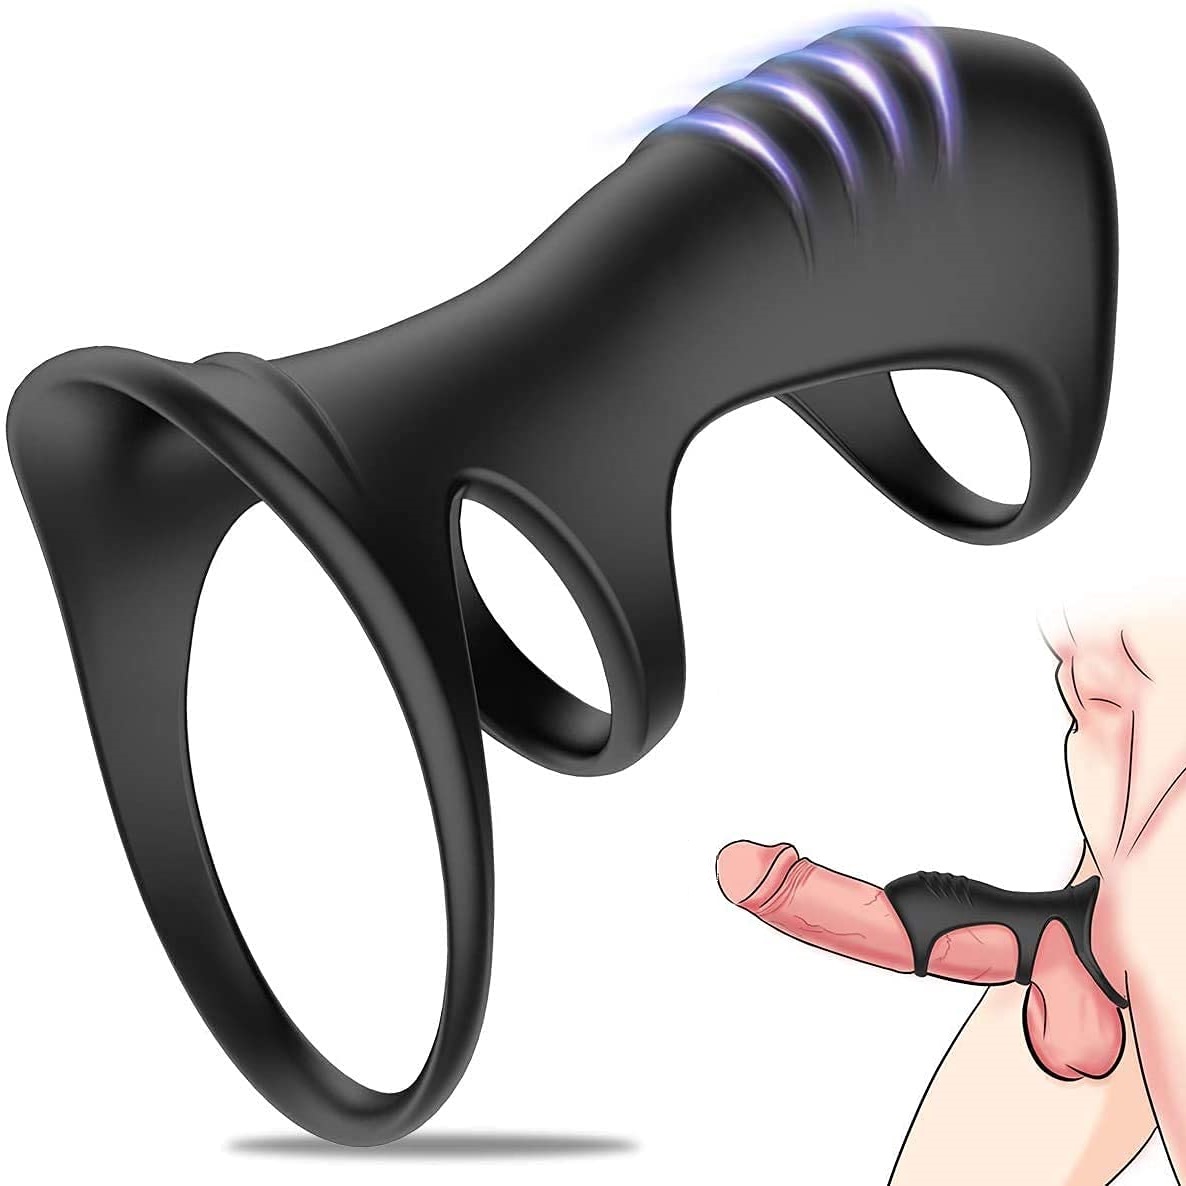 Silicone Dual Penis Ring,Cock Ring Erection Enhancing Sex Toy for Man or Couples Play Y127-YOOGiGi